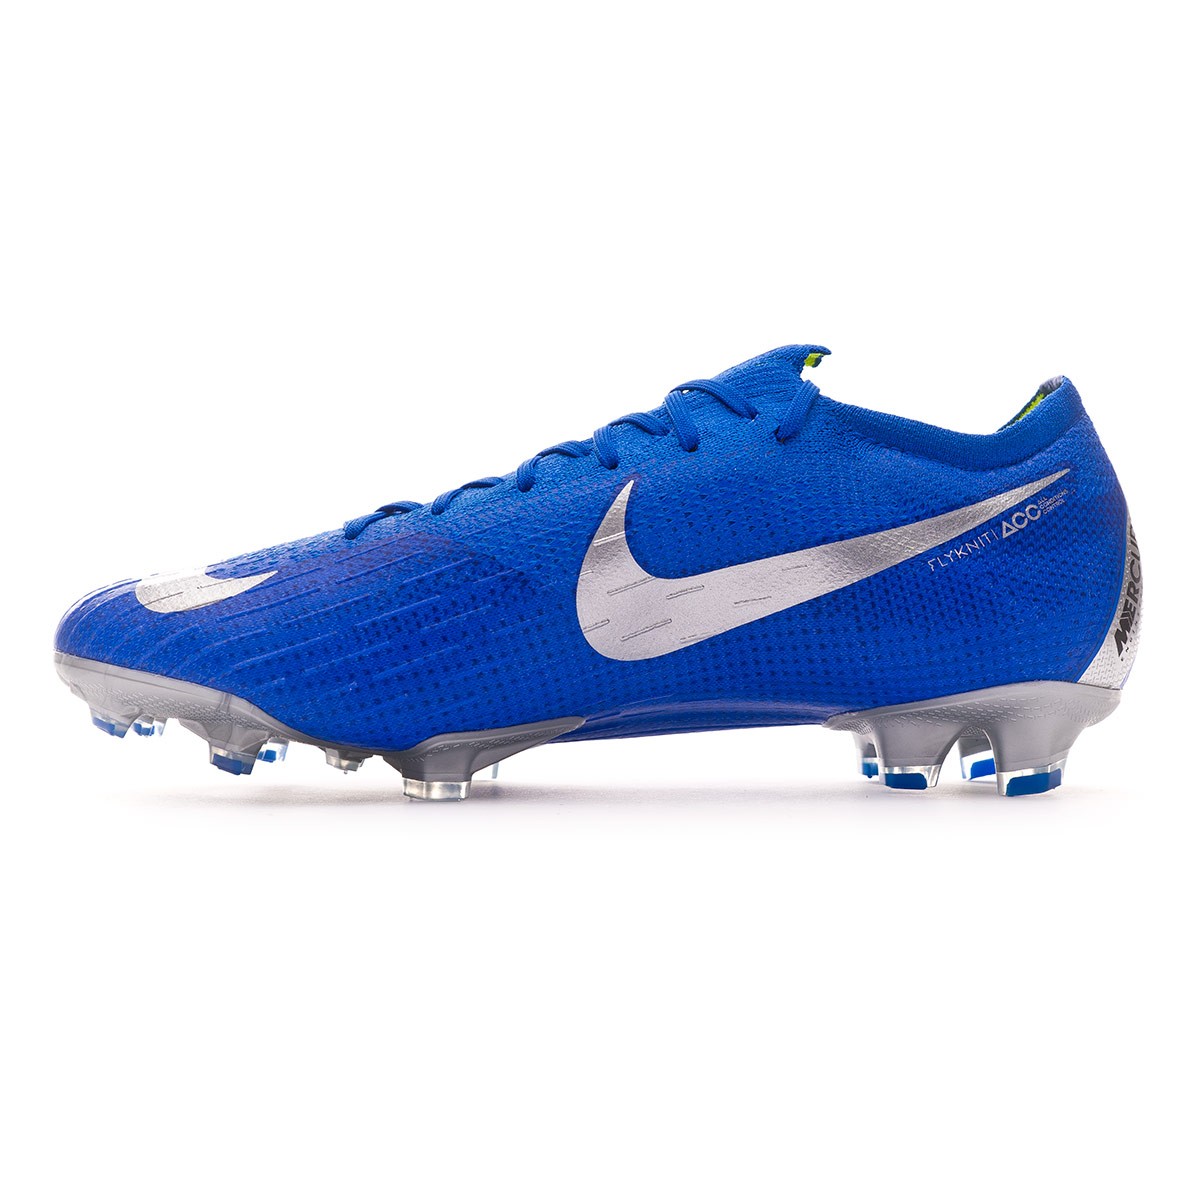 blue nike boots online -